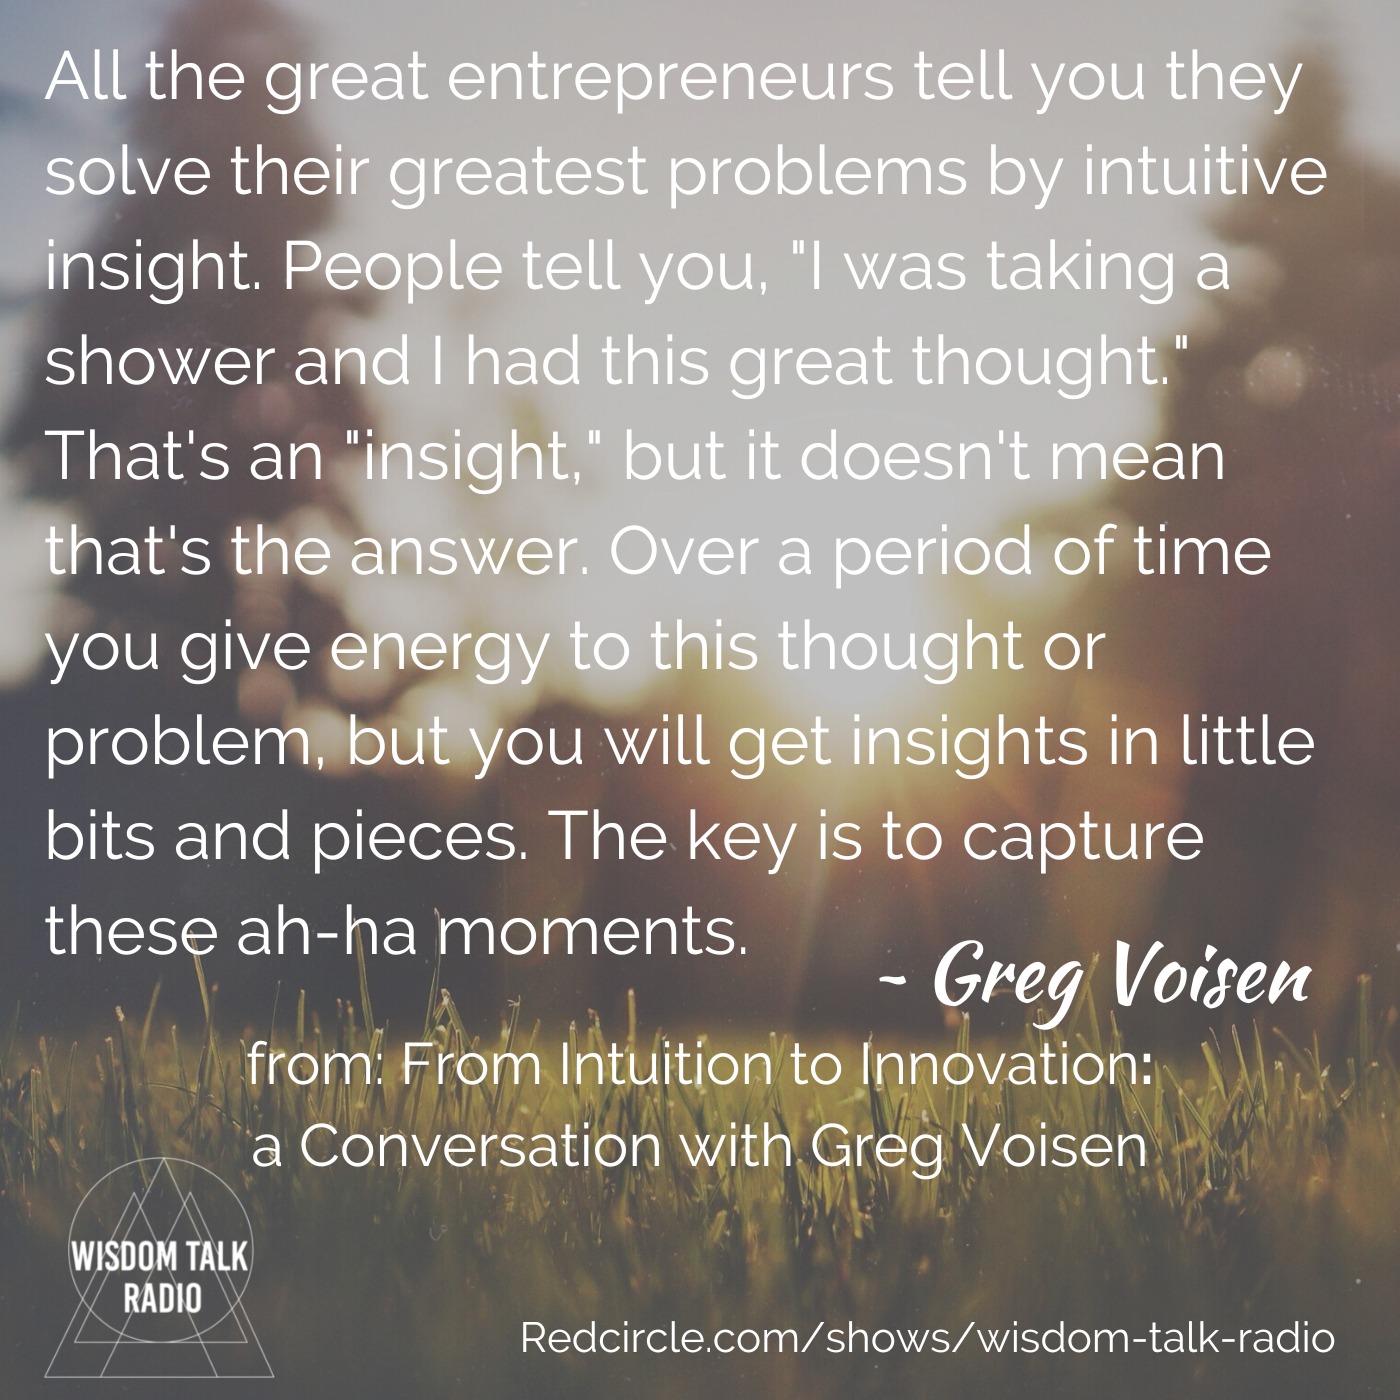 Intuition to Innovation: a Conversation with Greg Voisen